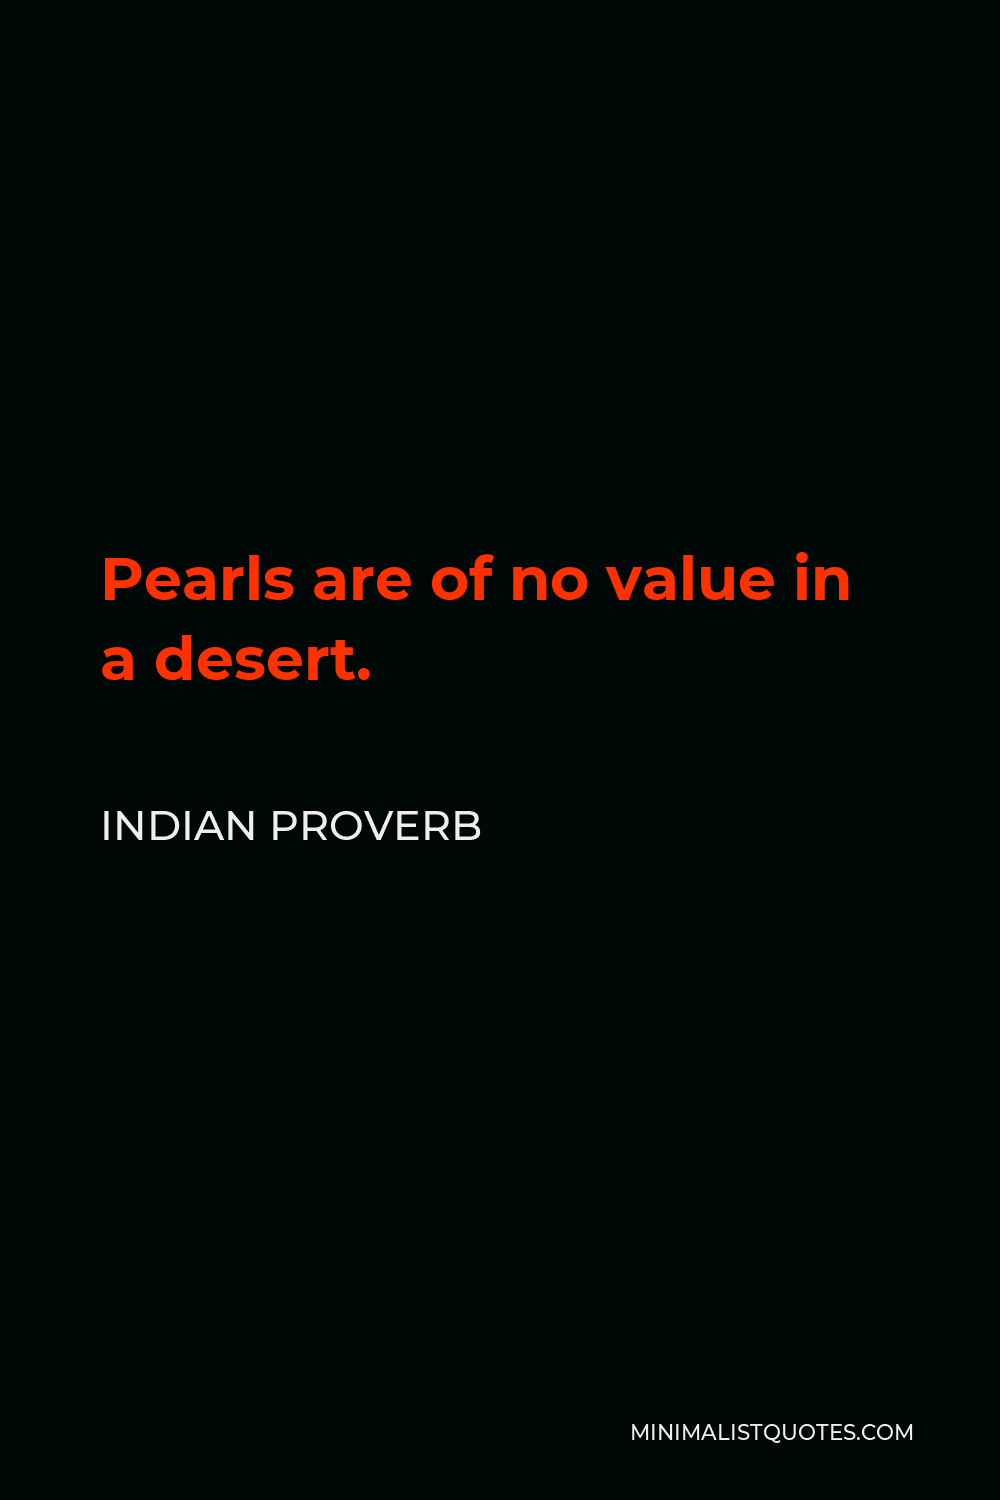 Indian Proverb Quote - Pearls are of no value in a desert.